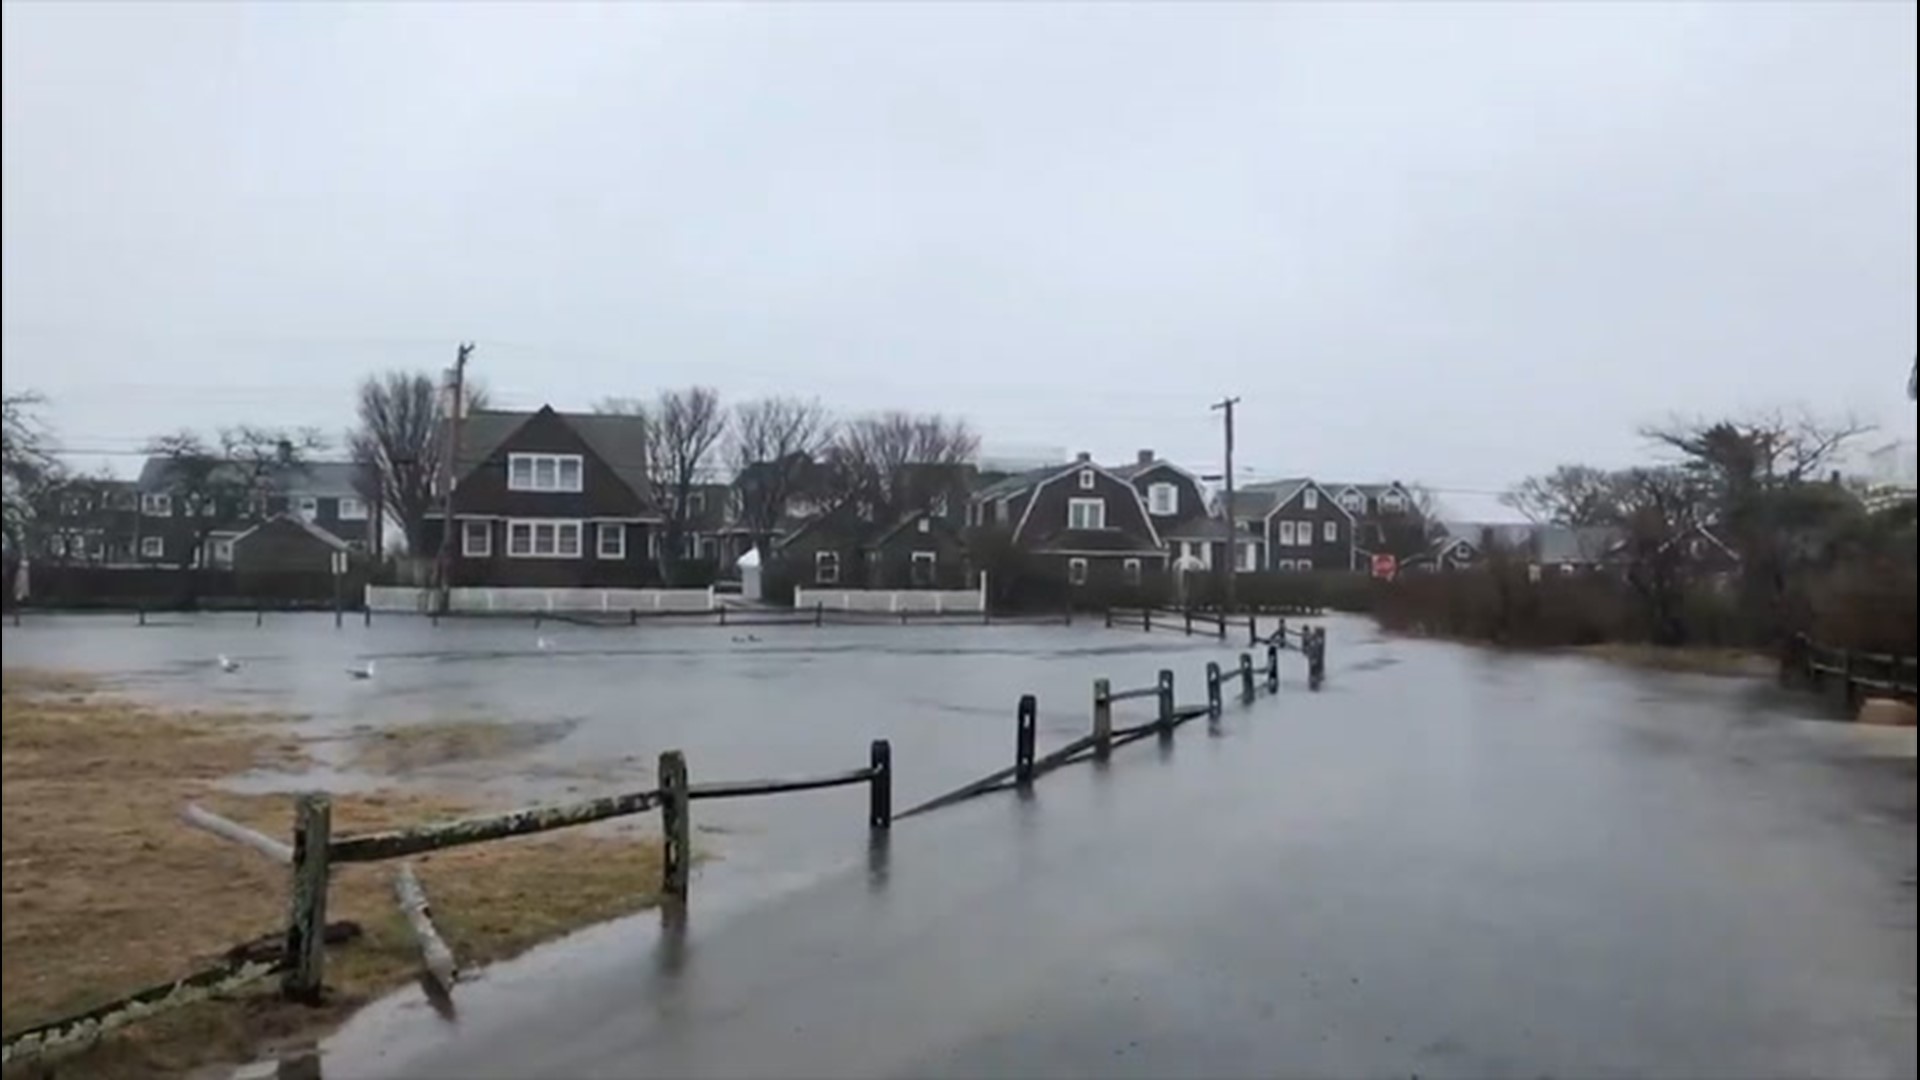 Roads were underwater as floodwaters swept through residential areas in Nantucket, Massachusetts, on April 3.